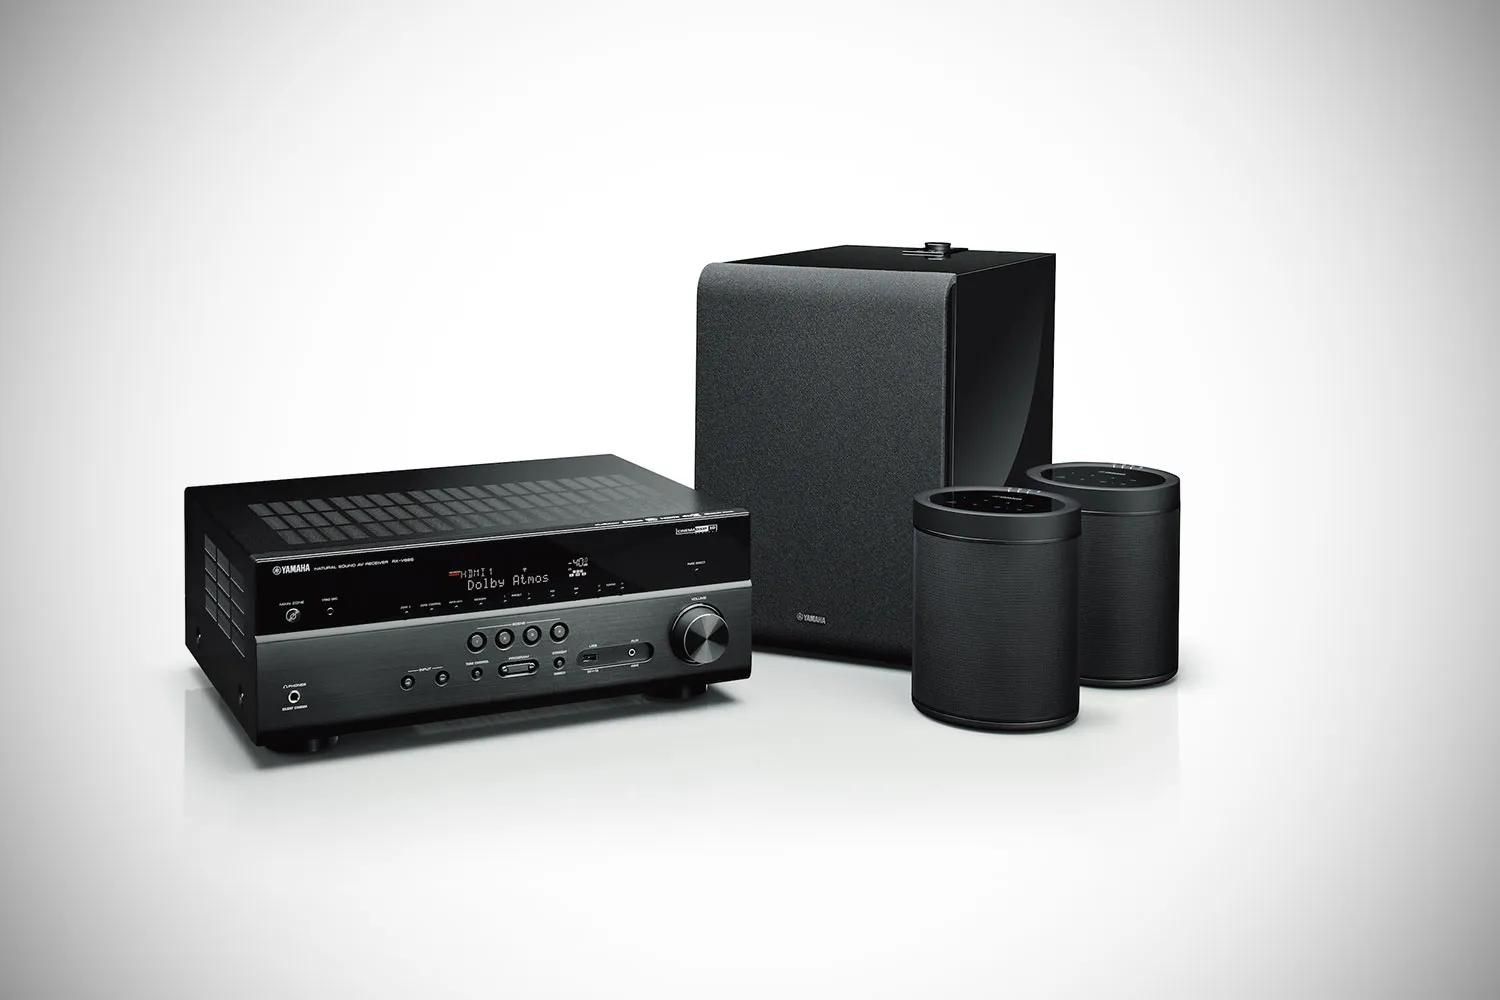 Yamaha Music Cast Network AV Receiver: How To Add Wired Speakers In A Different Room